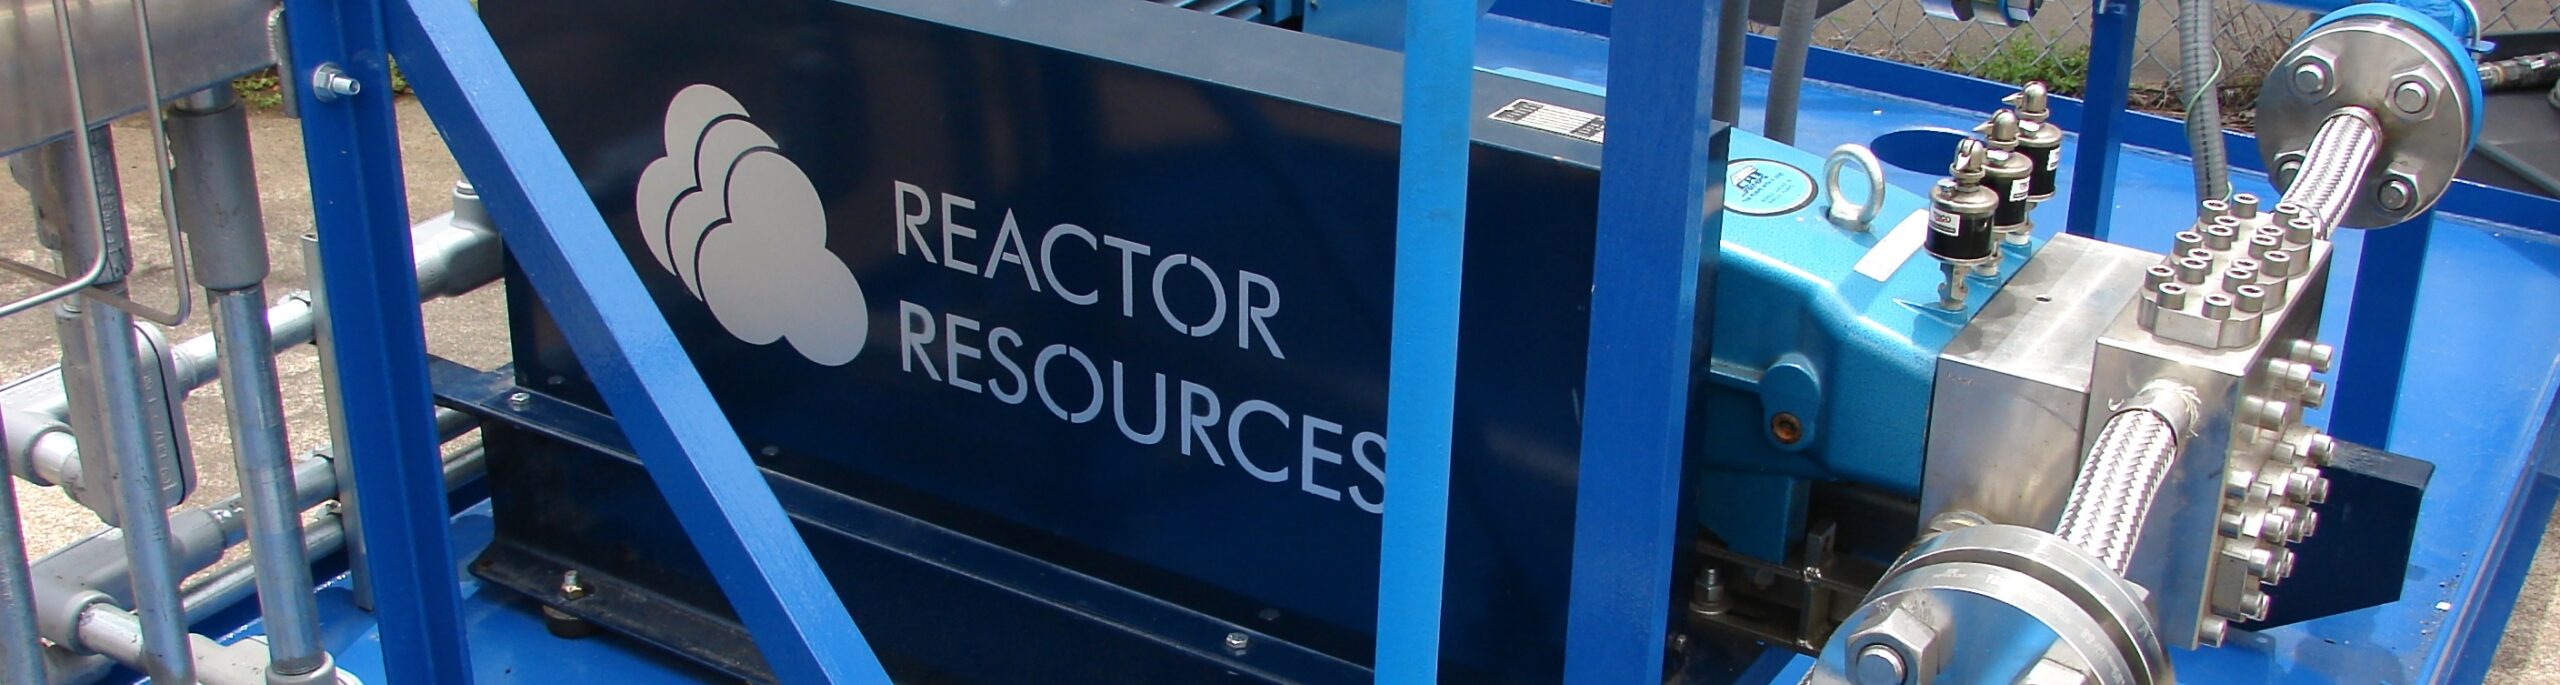 Reactor Resources Sulfiding Services